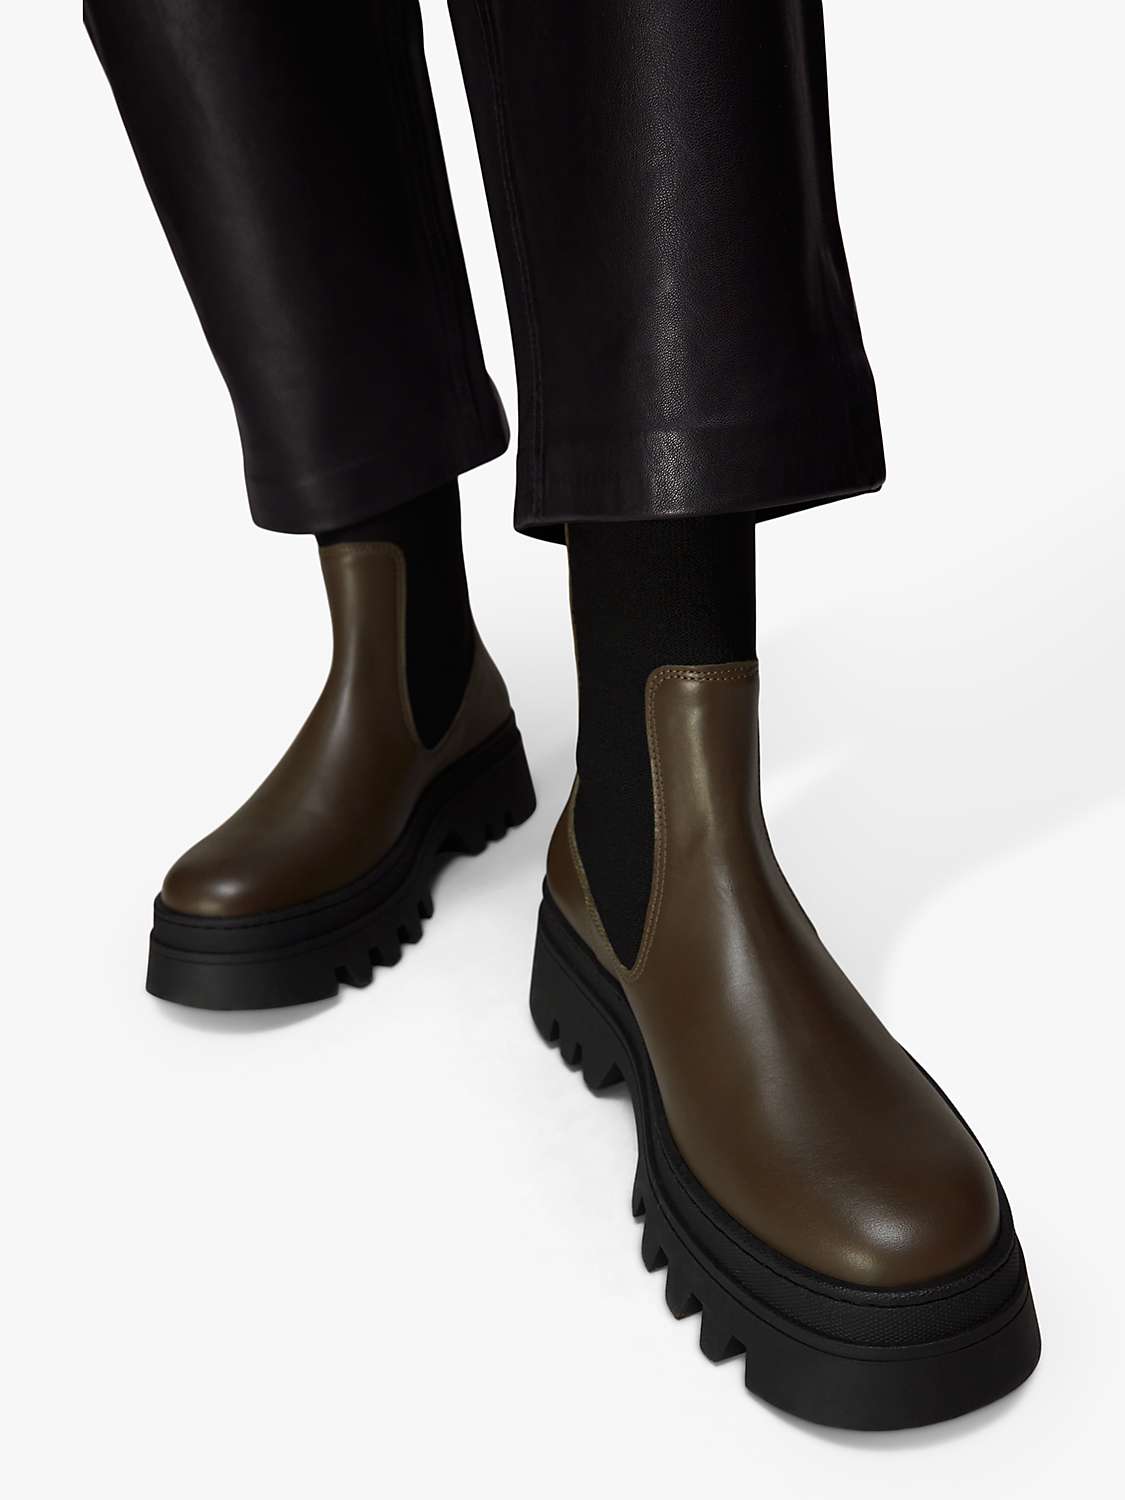 Buy Whistles Hatton Chunky Leather Chelsea Boots Online at johnlewis.com